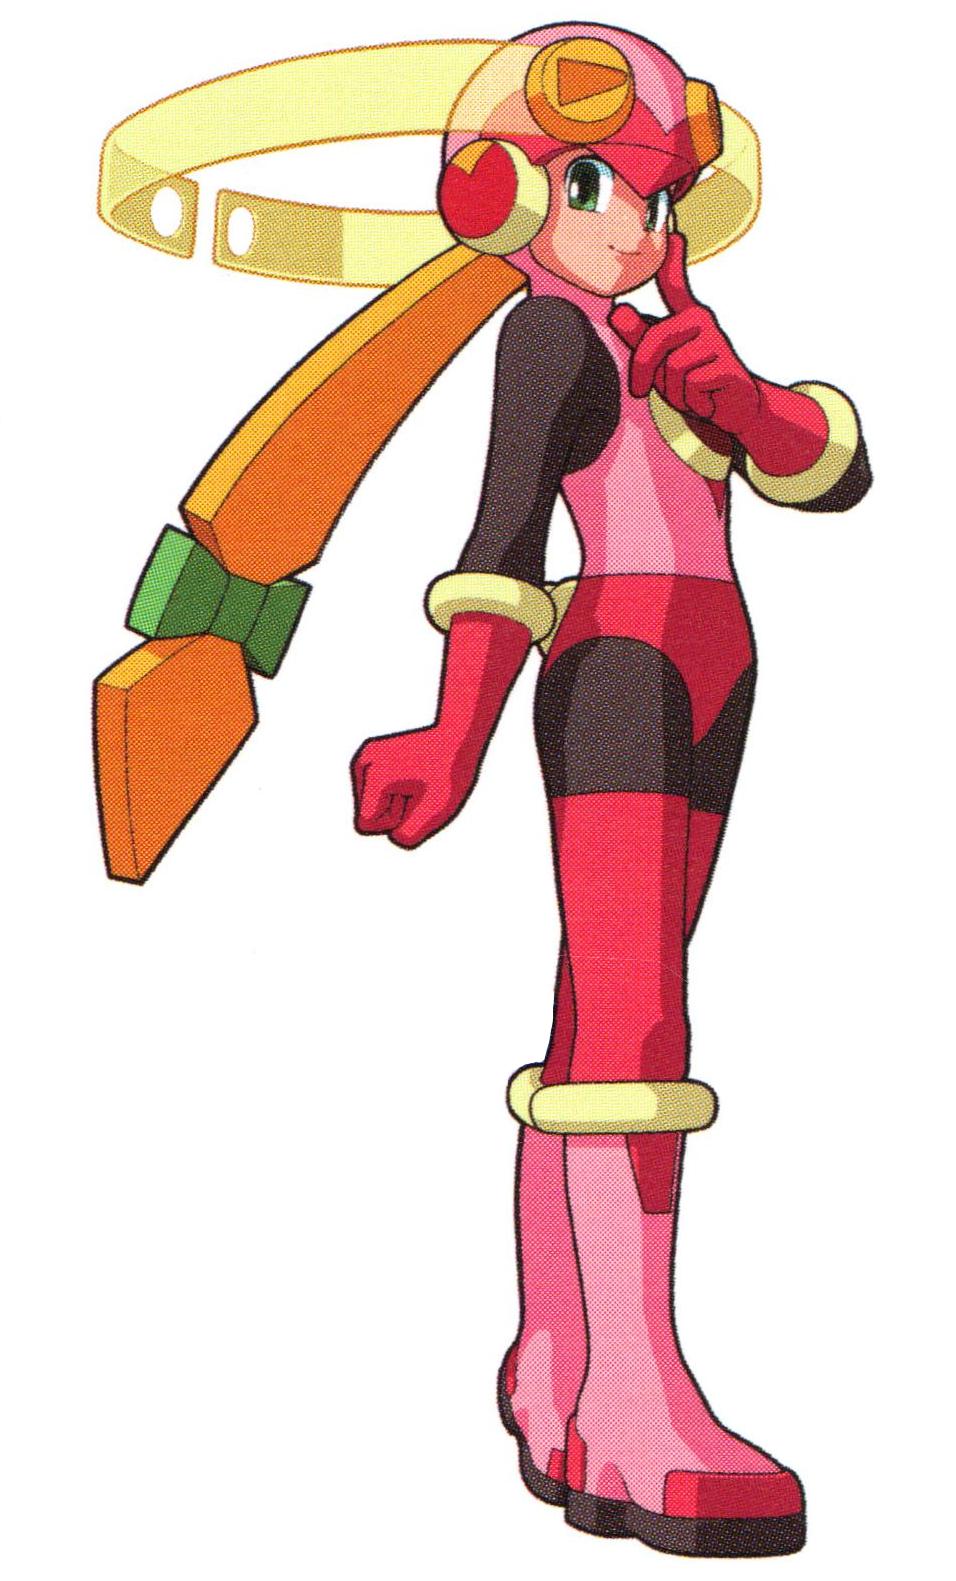 Roll.EXE first appeared in the game Mega Man Battle Network, where she served as the supportive net-navigational program for the protagonist.
She later made appearances in several sequels and spin-offs of the Mega Man Battle Network series, including Mega Man Battle Network 2, Mega Man Battle Network 3, and Mega Man Battle Network 6.